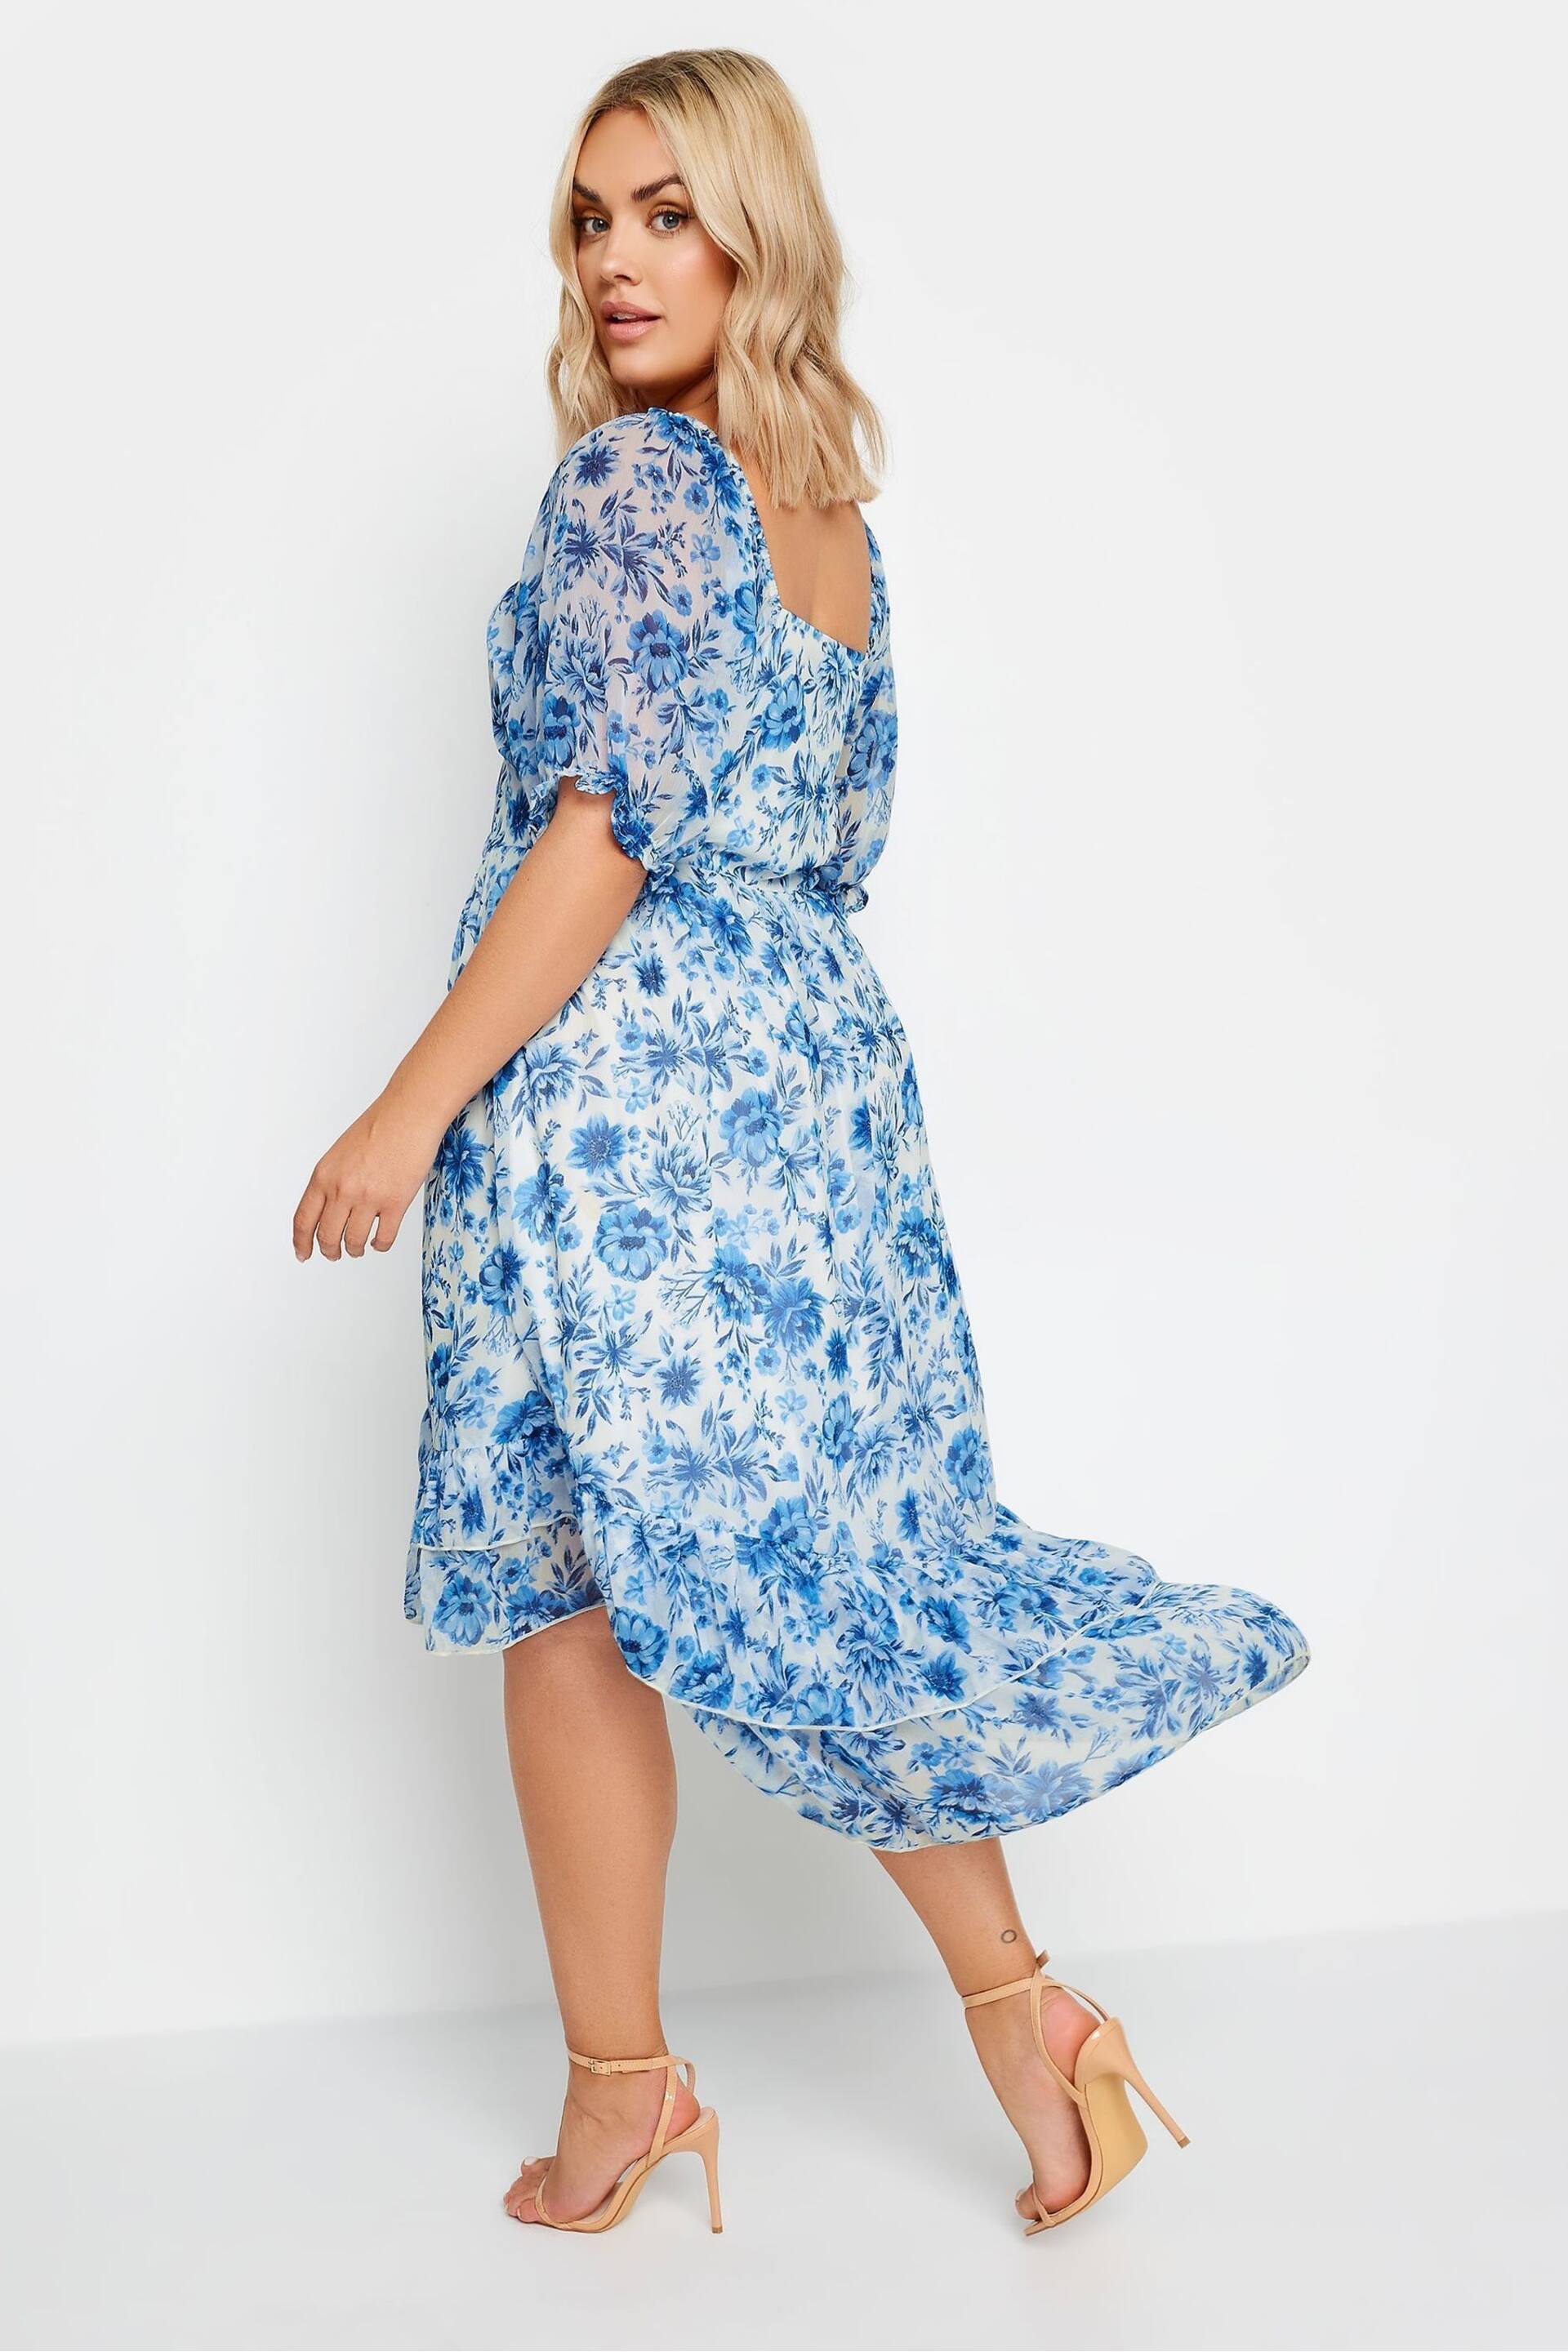 Yours Curve Blue Limited Floaty High Low Dress - Image 3 of 5